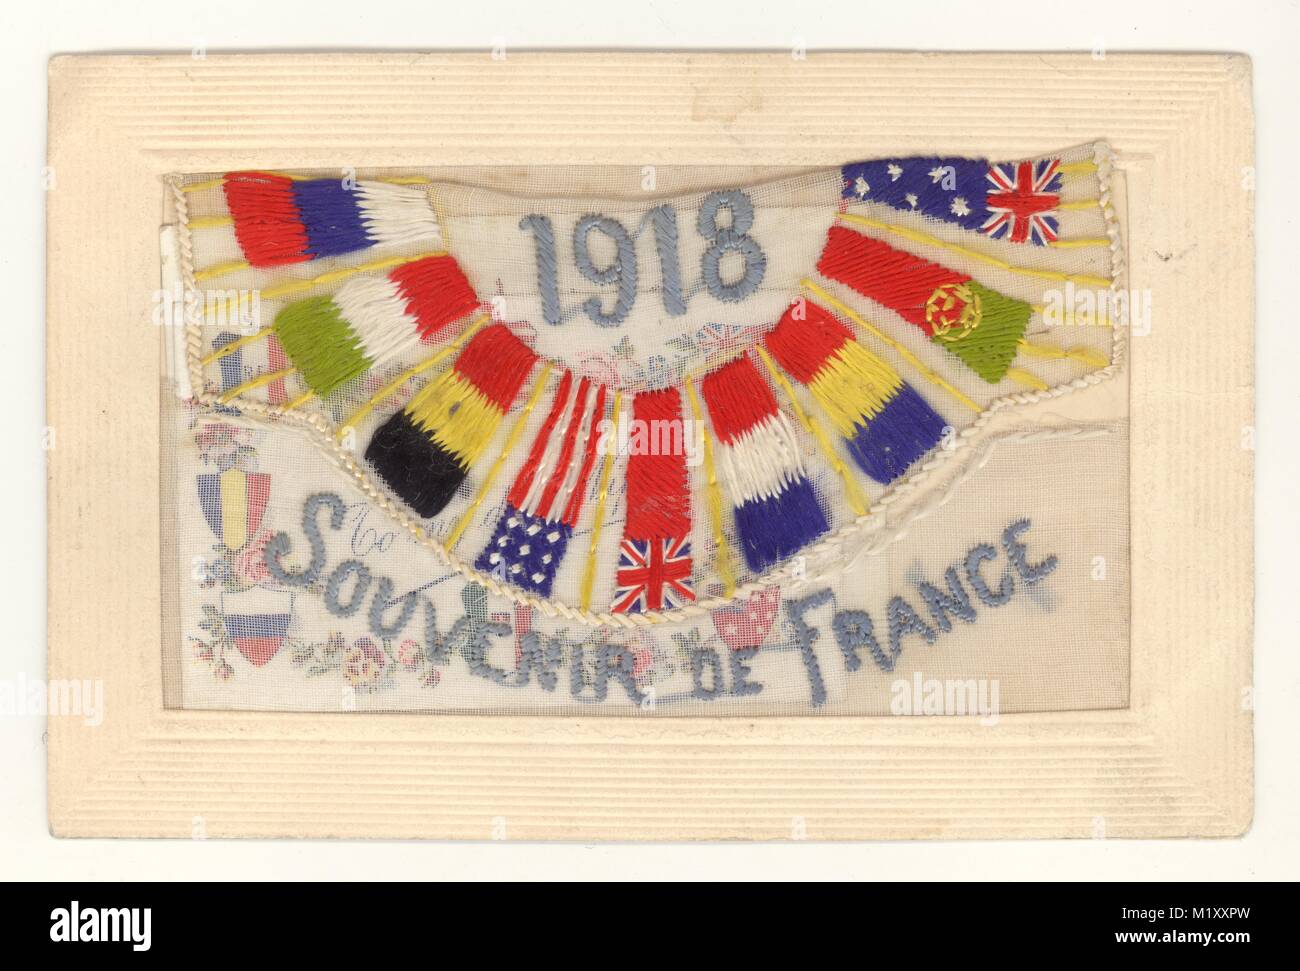 WW1 era silk embroidered card, entitled 'Souvenir de France', with allied forces flags, dated 1918, sent home by British soldier, made in Paris, 1918 Stock Photo